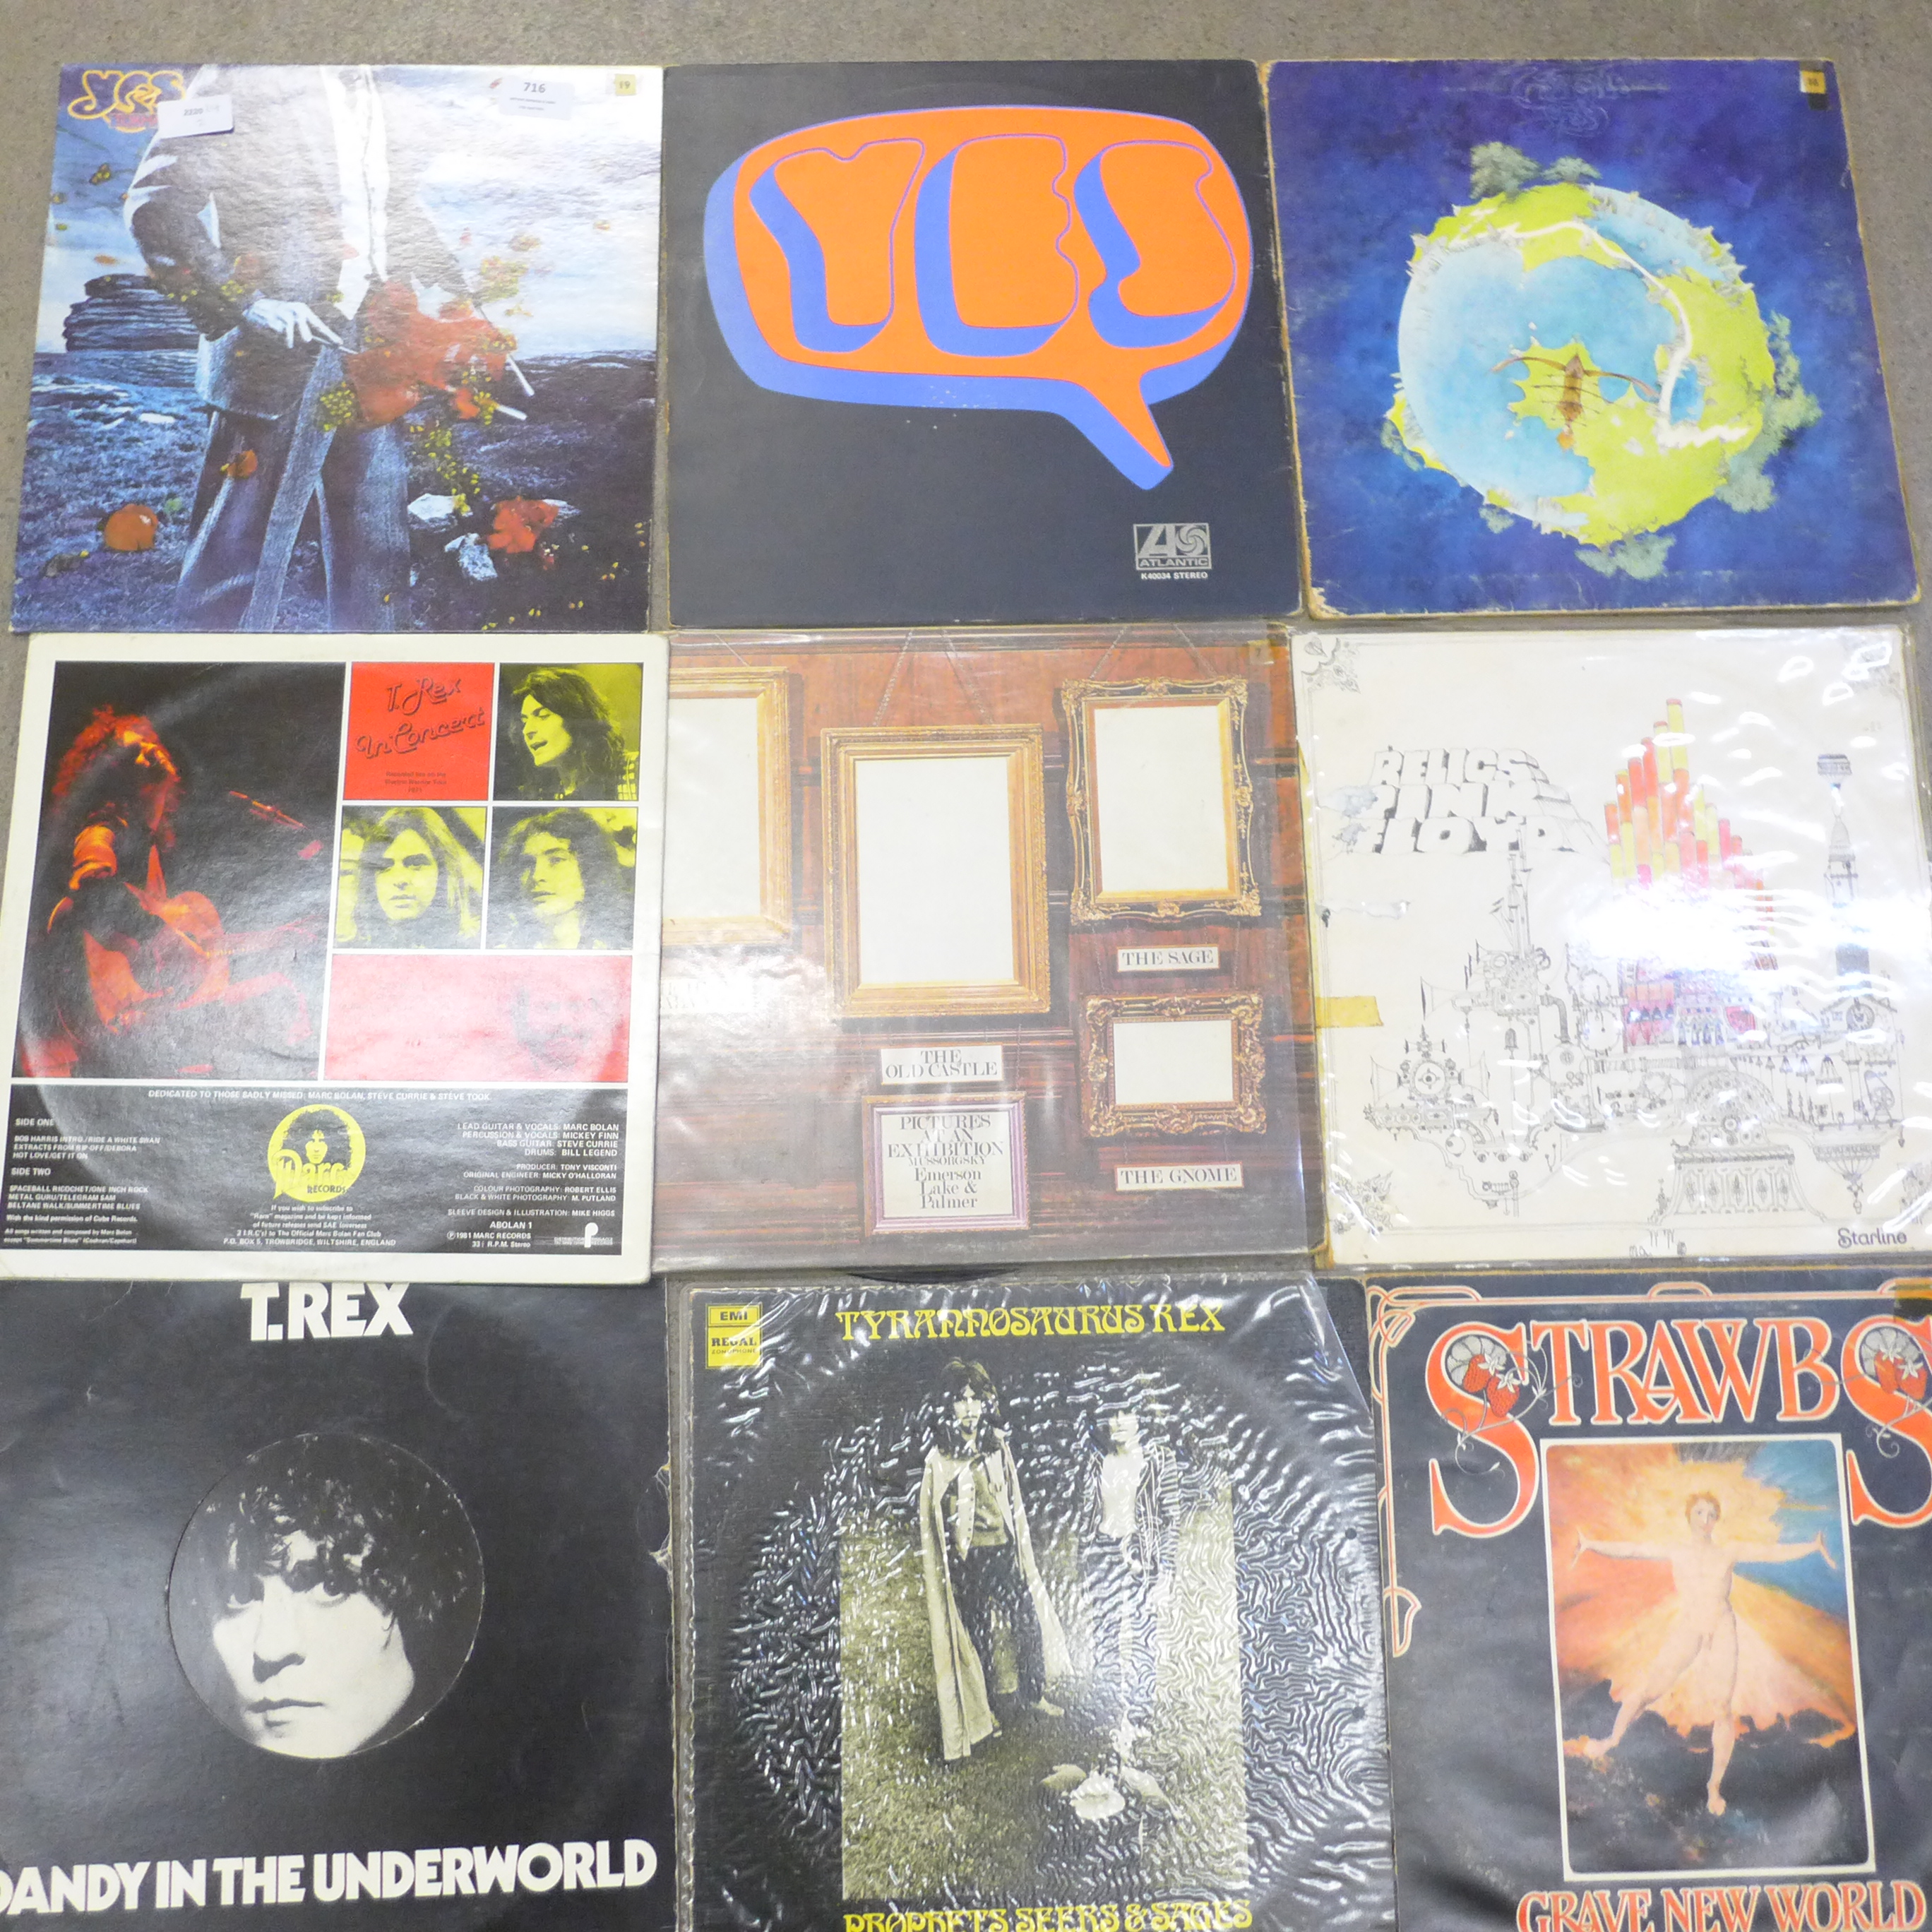 Rock LP records including Yes, Pink Floyd, T-Rex, Ramones and Lou Reed